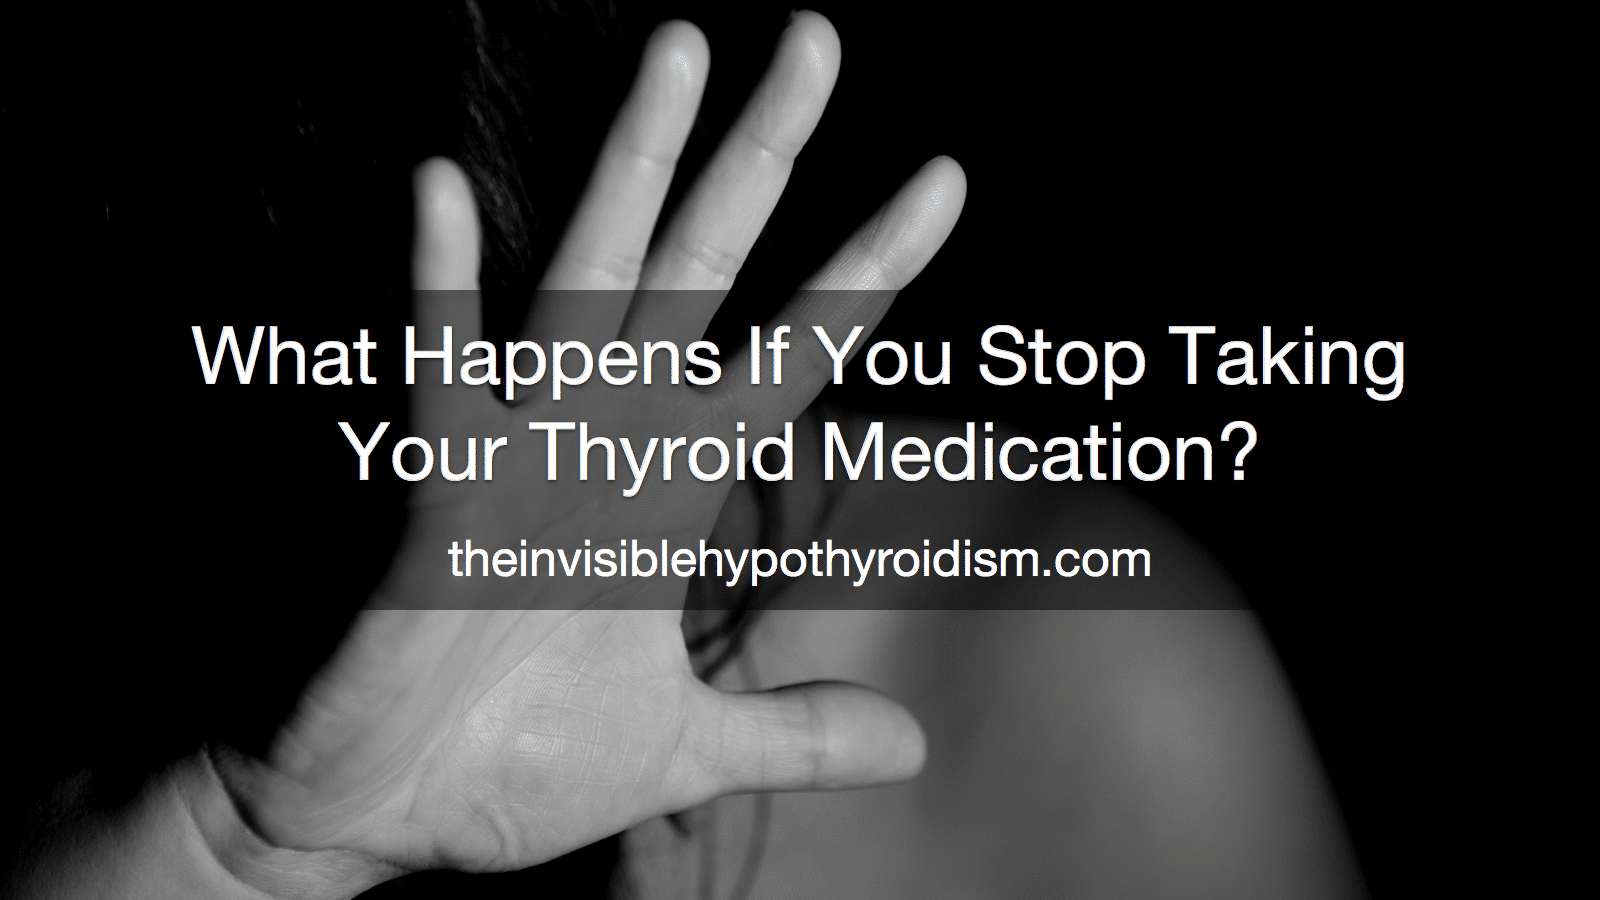 What Happens If You Stop Taking Your Thyroid Medication